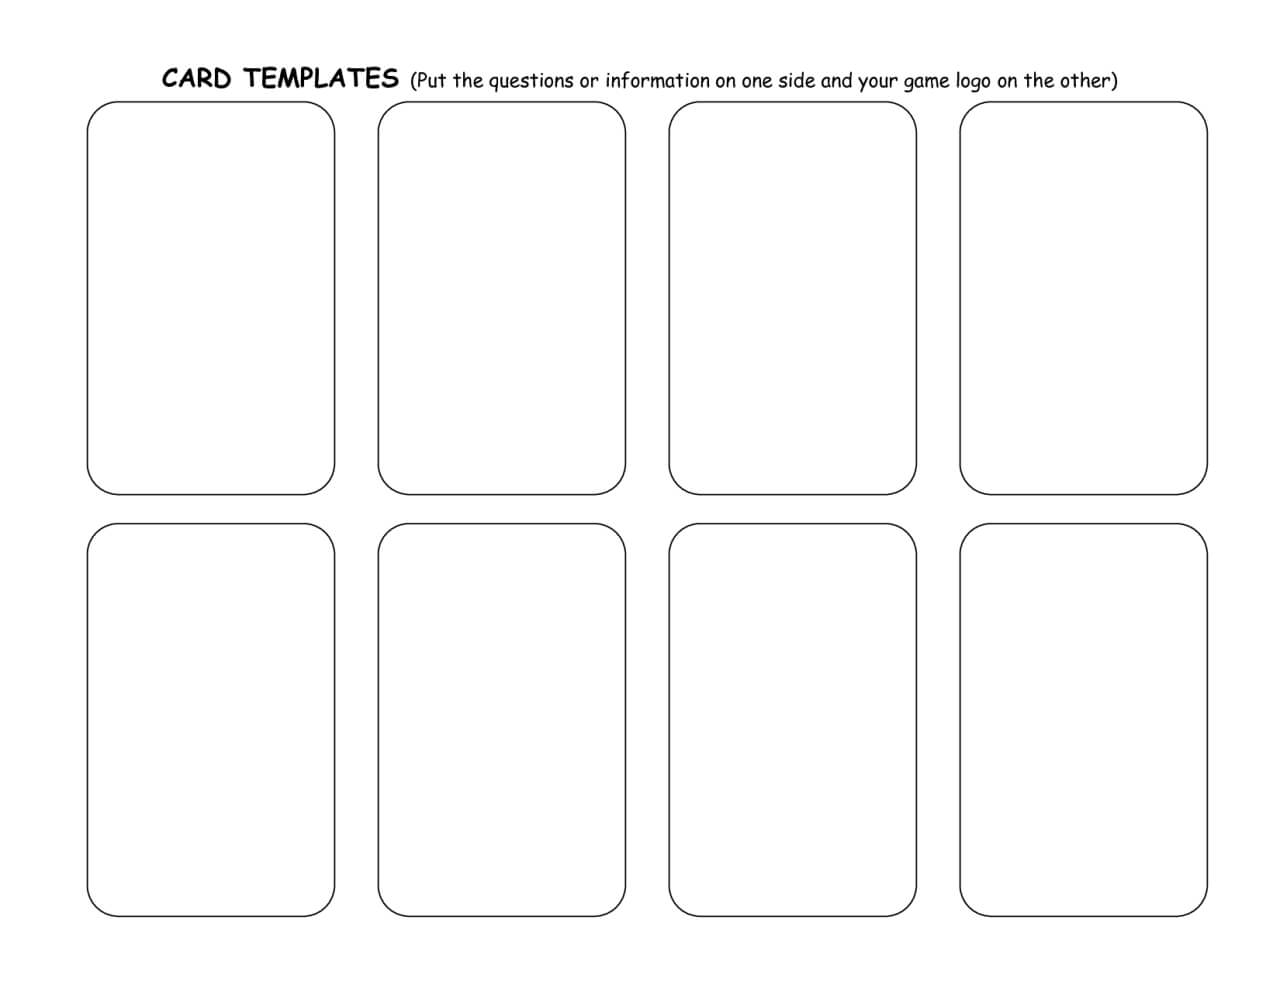 Trading Card Game Template – Free Download In 2019 | Trading Regarding Free Trading Card Template Download